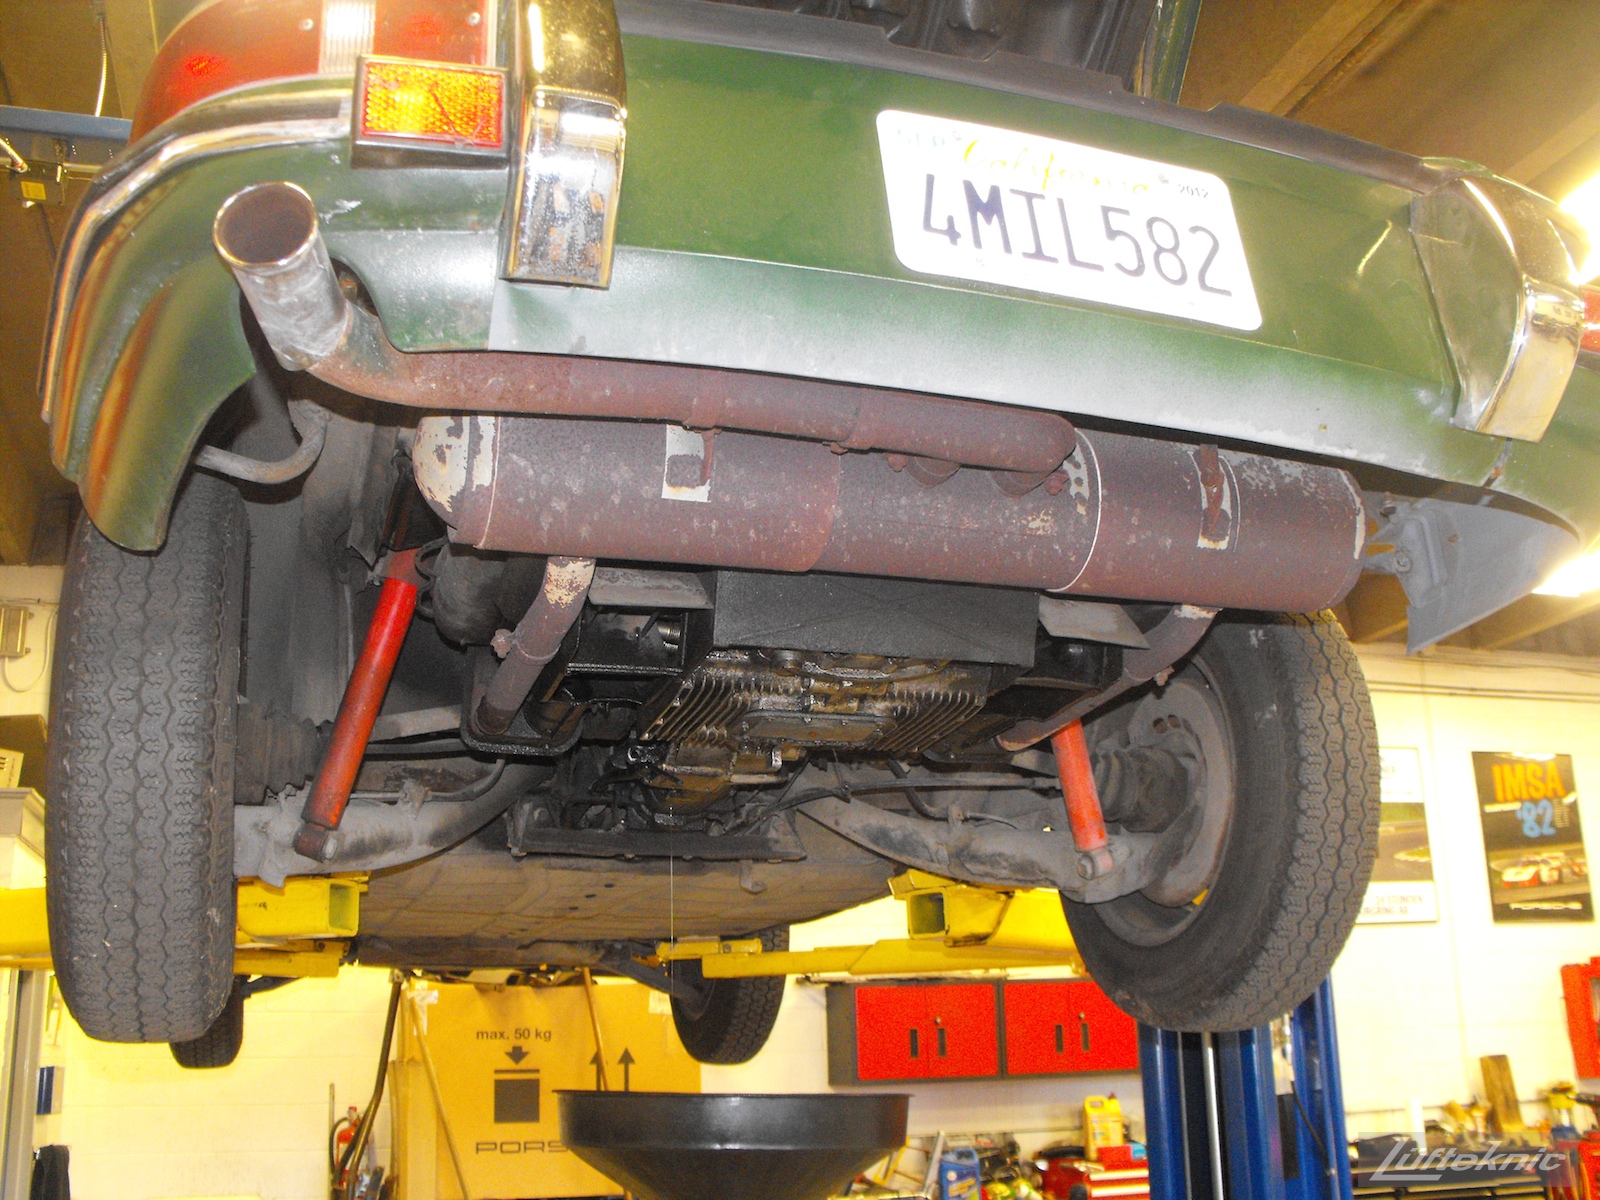 A rusty muffler exposed and oily bottom of the engine of an Irish Green Porsche 912 undergoing restoration at Lufteknic.